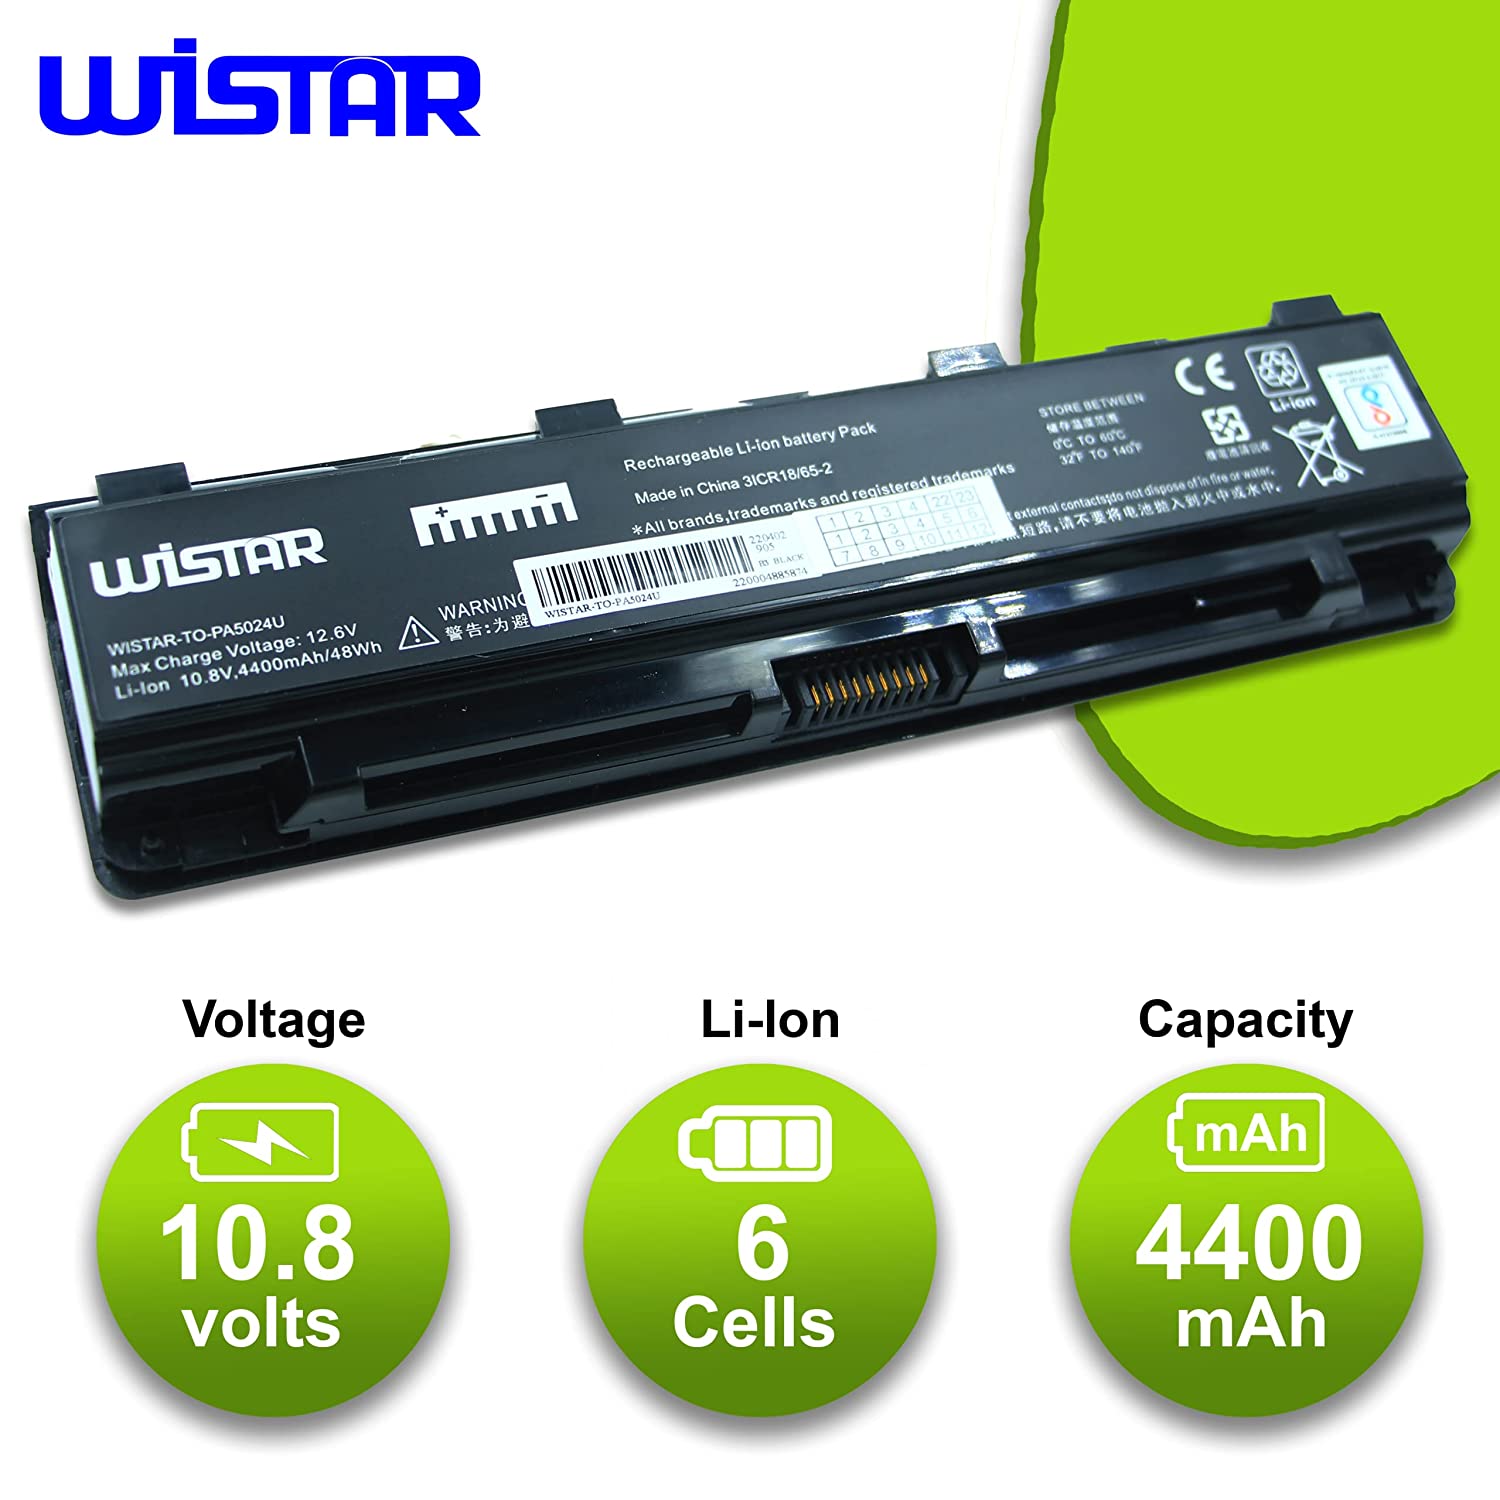 WISTAR 6Cell Laptop Battery for Toshiba Satellite C800 C805 C840 C845 C850 C855 C870 L800 L805 L830 L840 L845 L850 M800 P800 PA5024U-1BRS Series Black